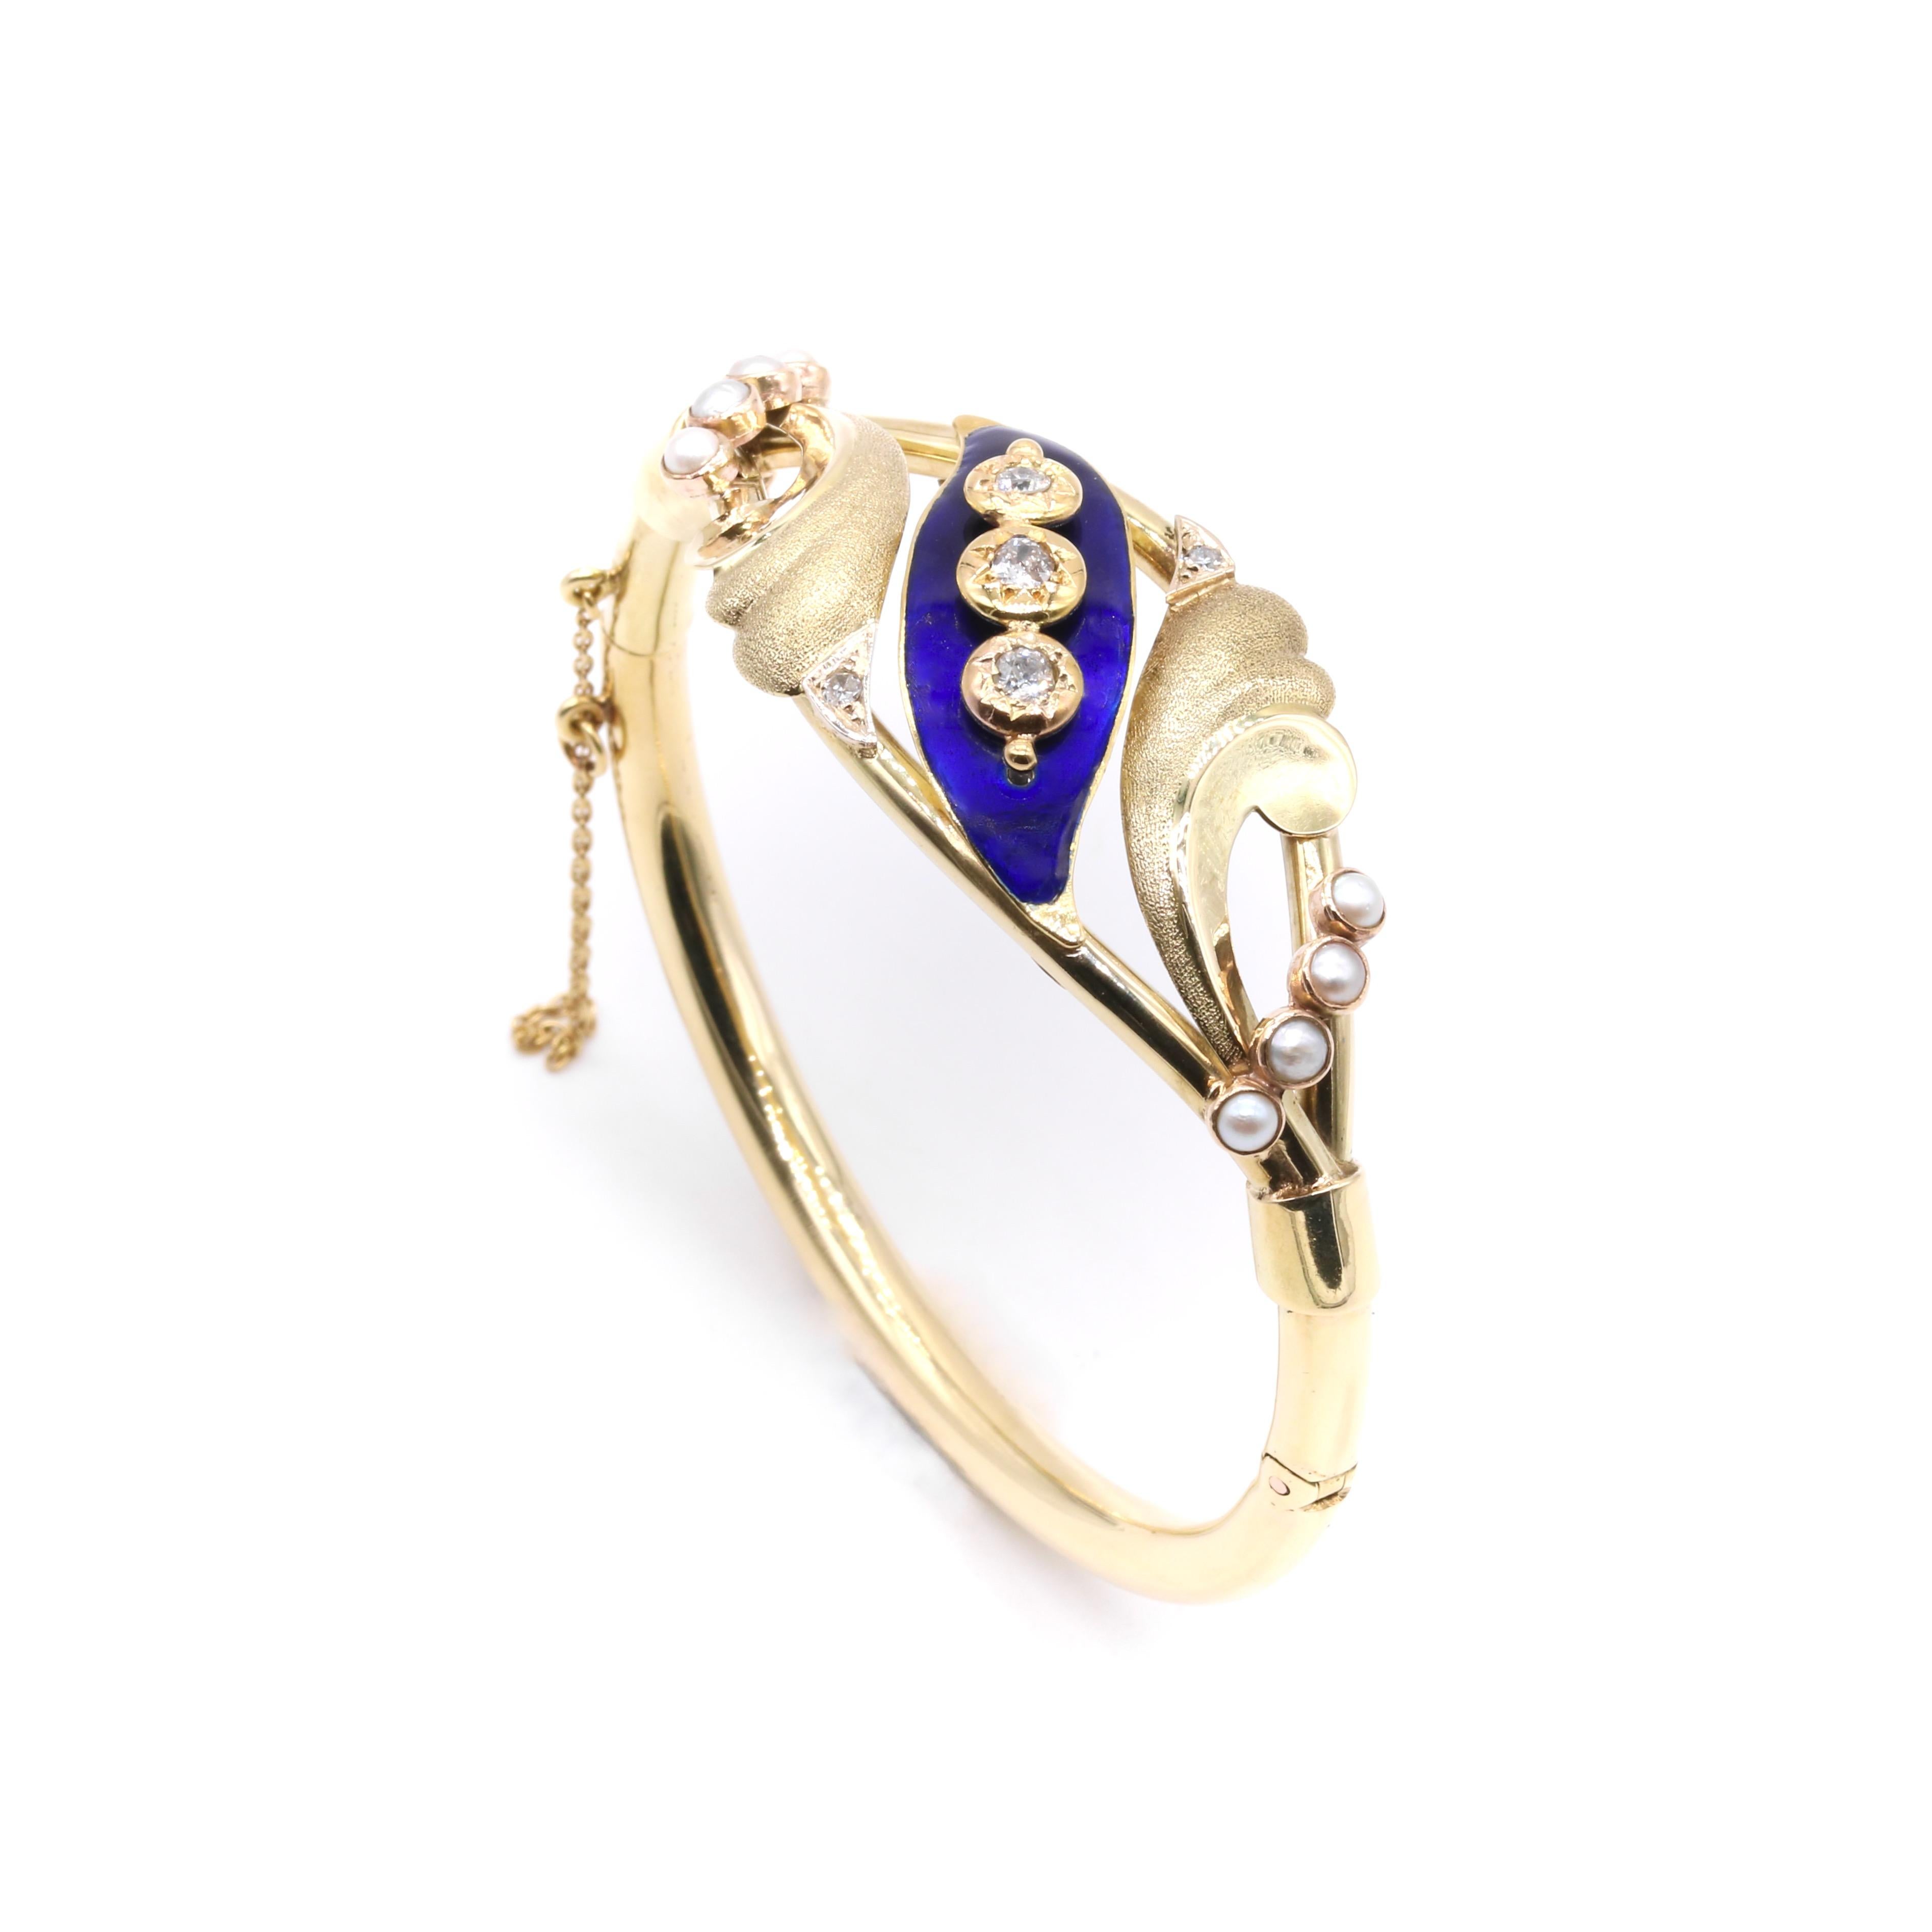 Antique Victorian 27g 14K Yellow Gold Diamond, Pearl and Blue Enamel Bracelet For Sale 2